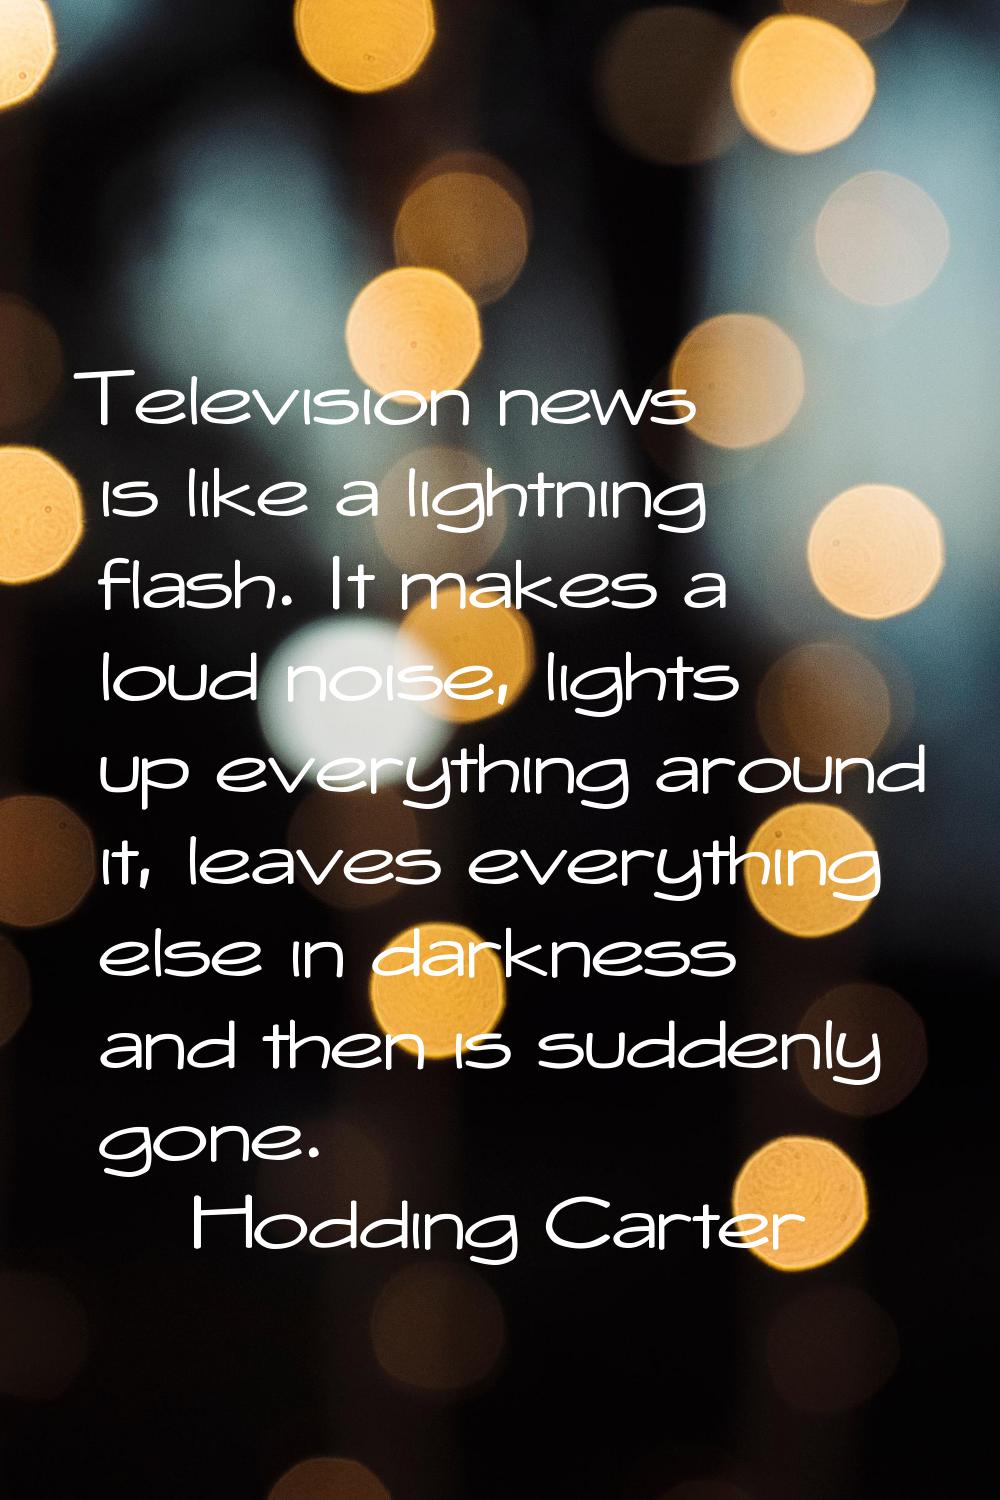 Television news is like a lightning flash. It makes a loud noise, lights up everything around it, l